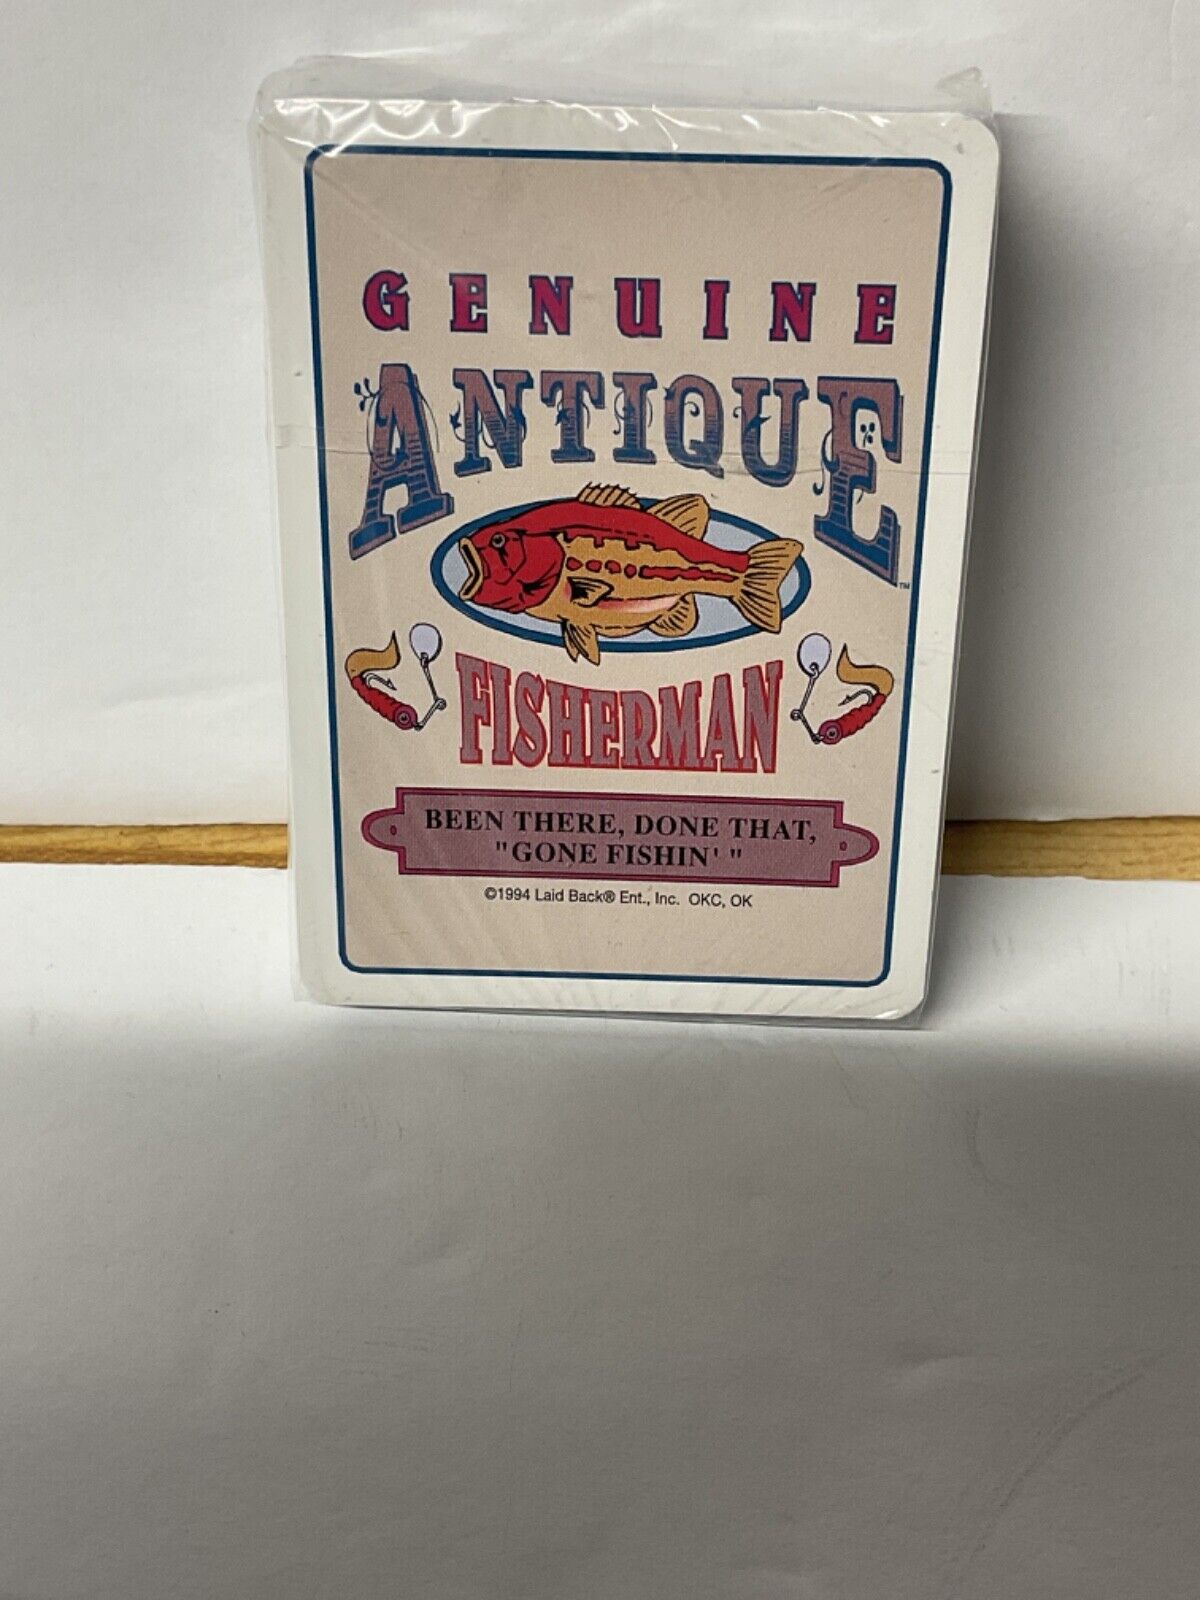 NEW GENUINE ANTIQUE FISHERMAN PLAYING CARDS 